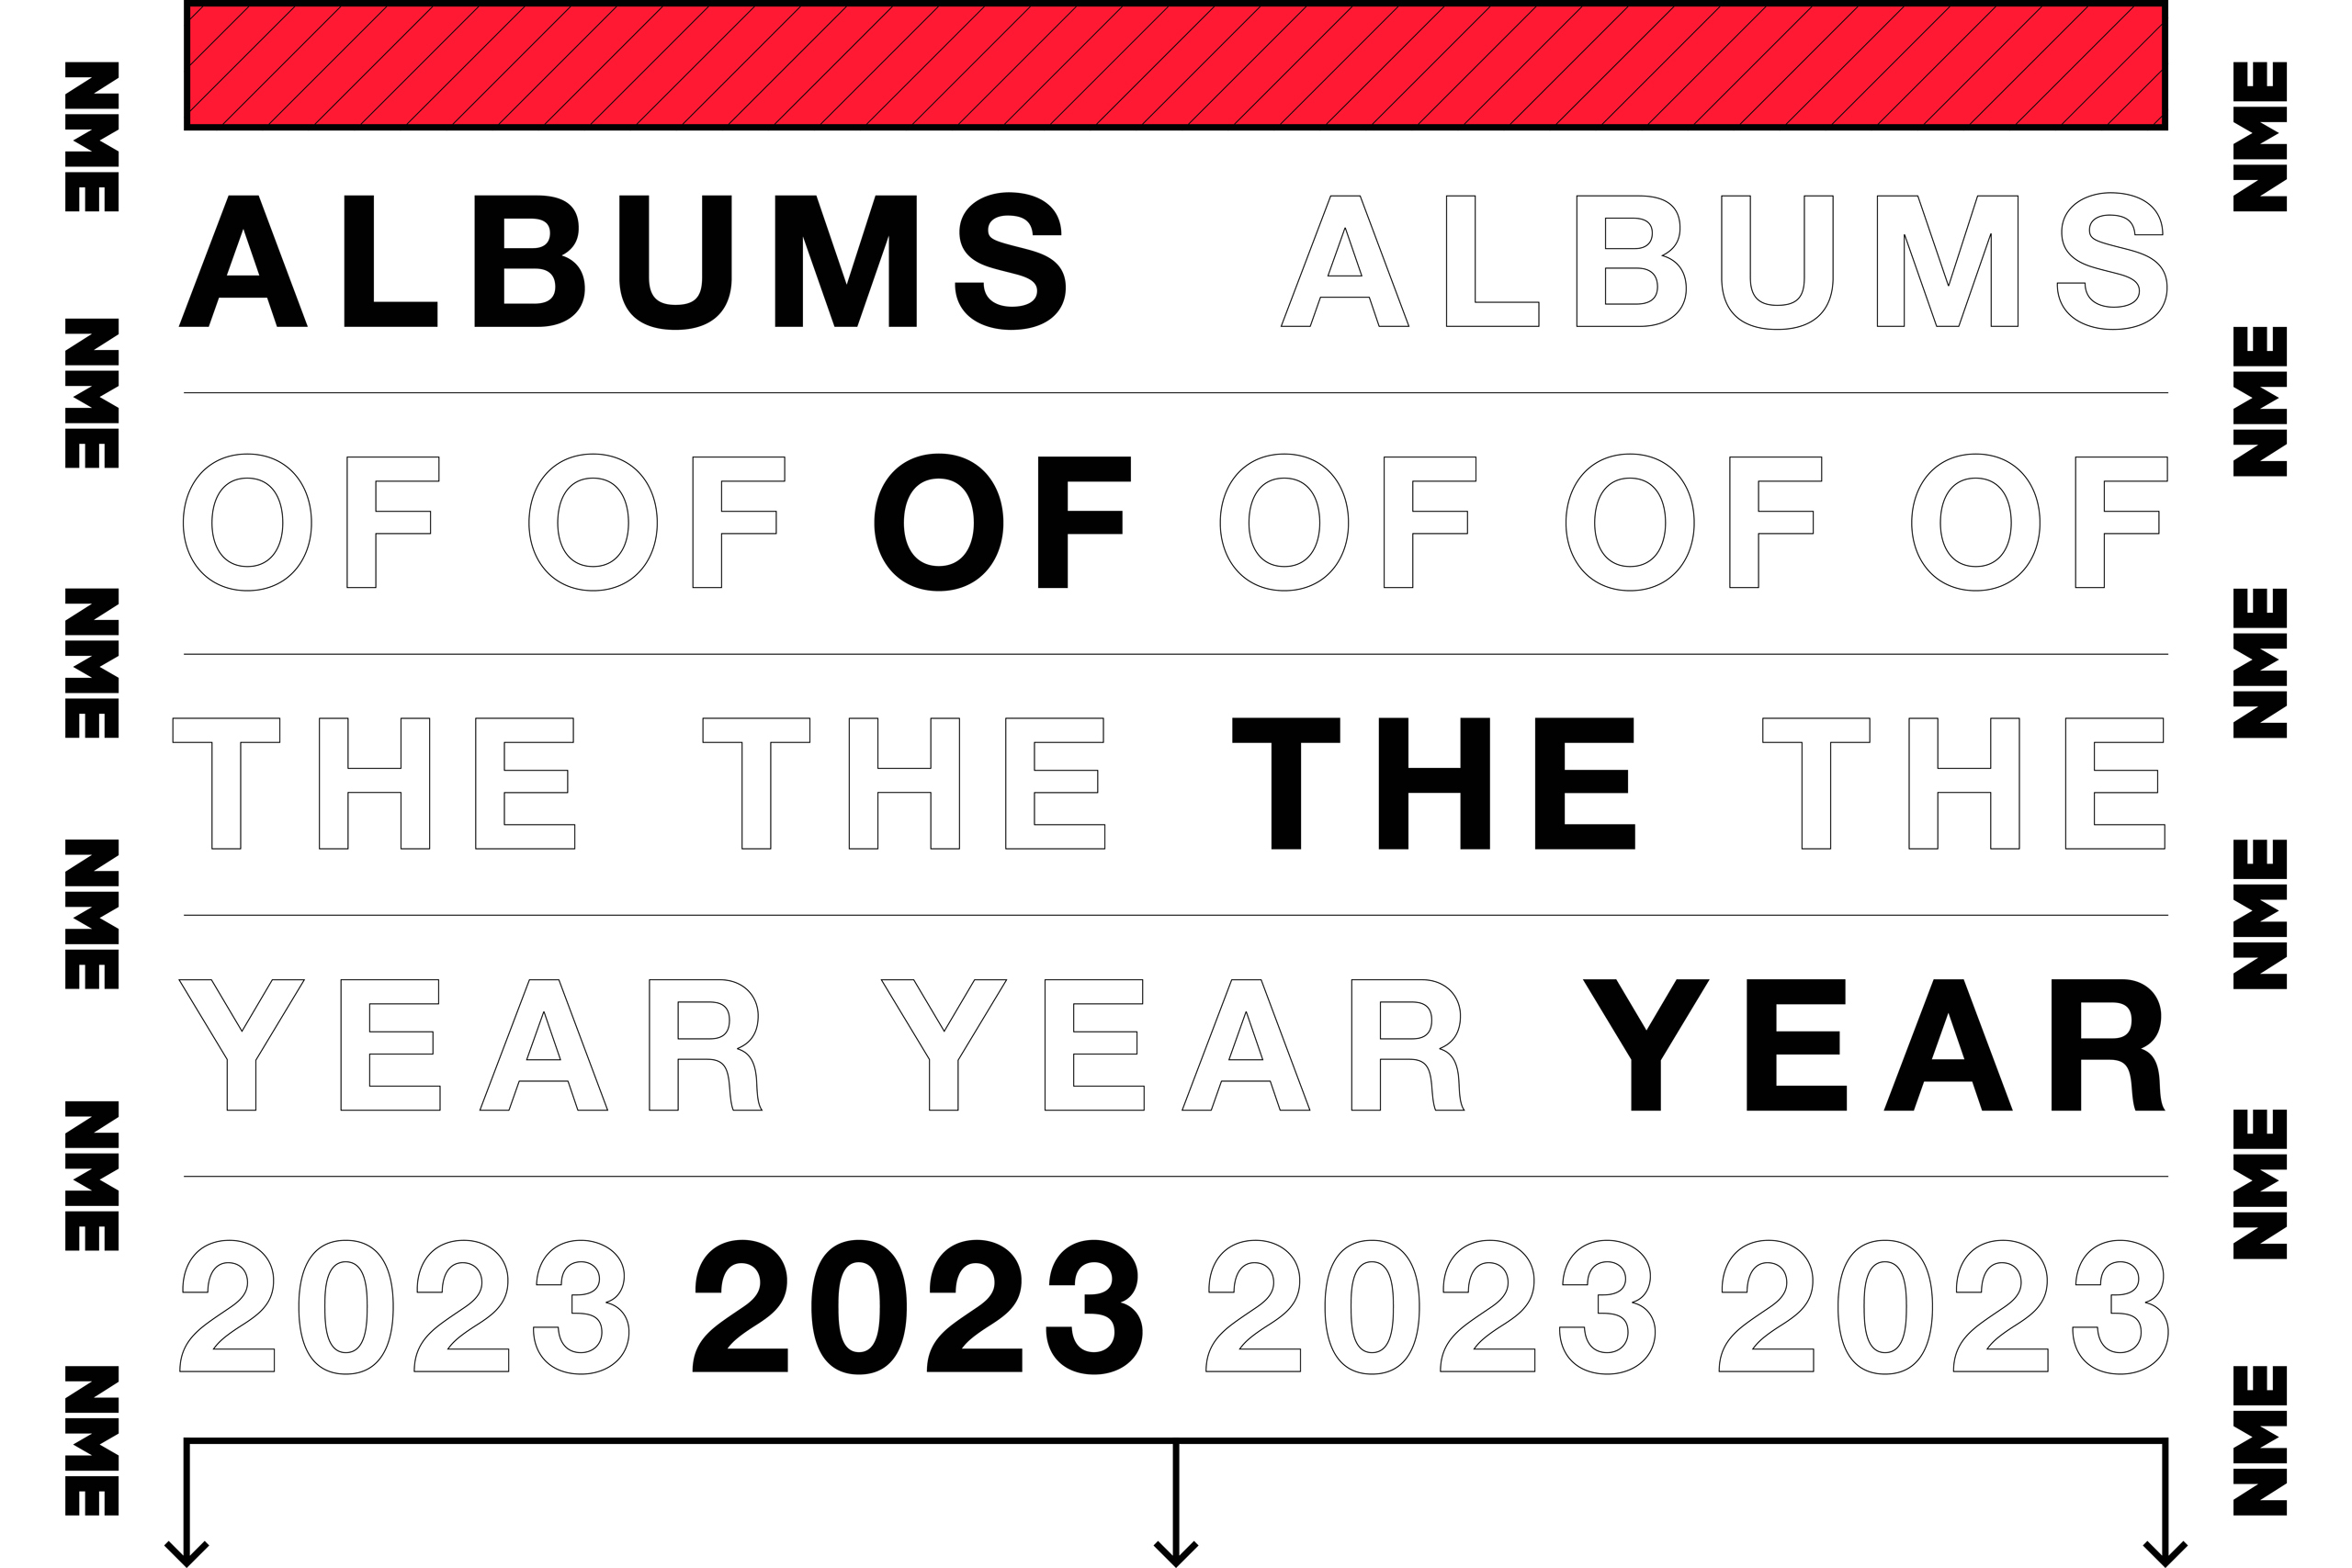 The 50 best albums of 2023